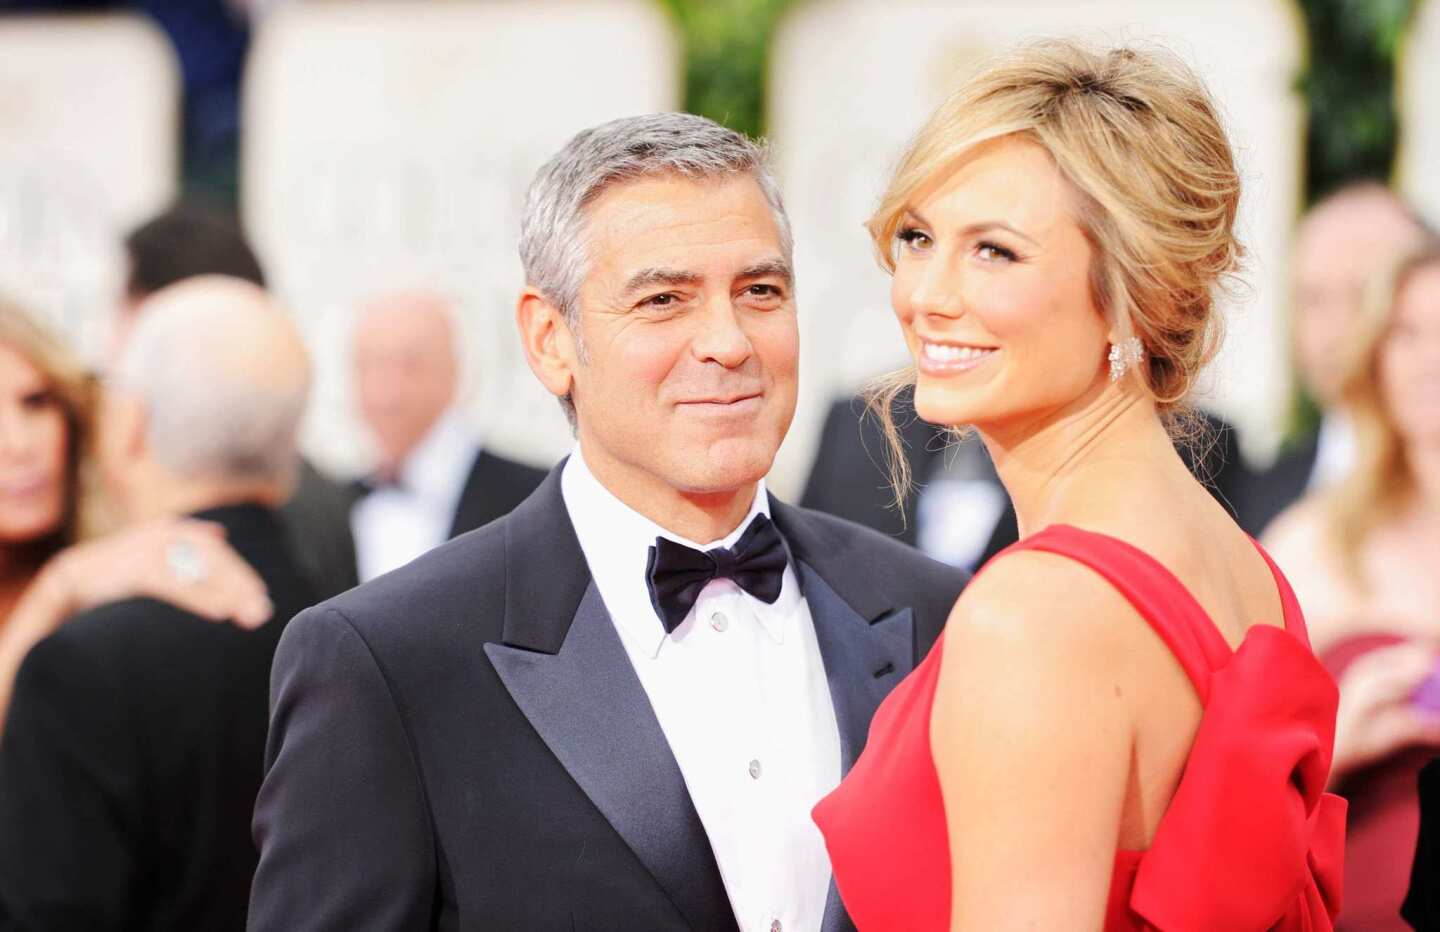 "I predict I will not win four, so I will be a pretty big loser tonight." Clooney is nominated for best actor for "The Descendants," best director for "The Ides of March" (and both films are nominated for best picture). RELATED: Complete Golden Globes coverage PHOTOS: Golden Globes red carpet arrivals